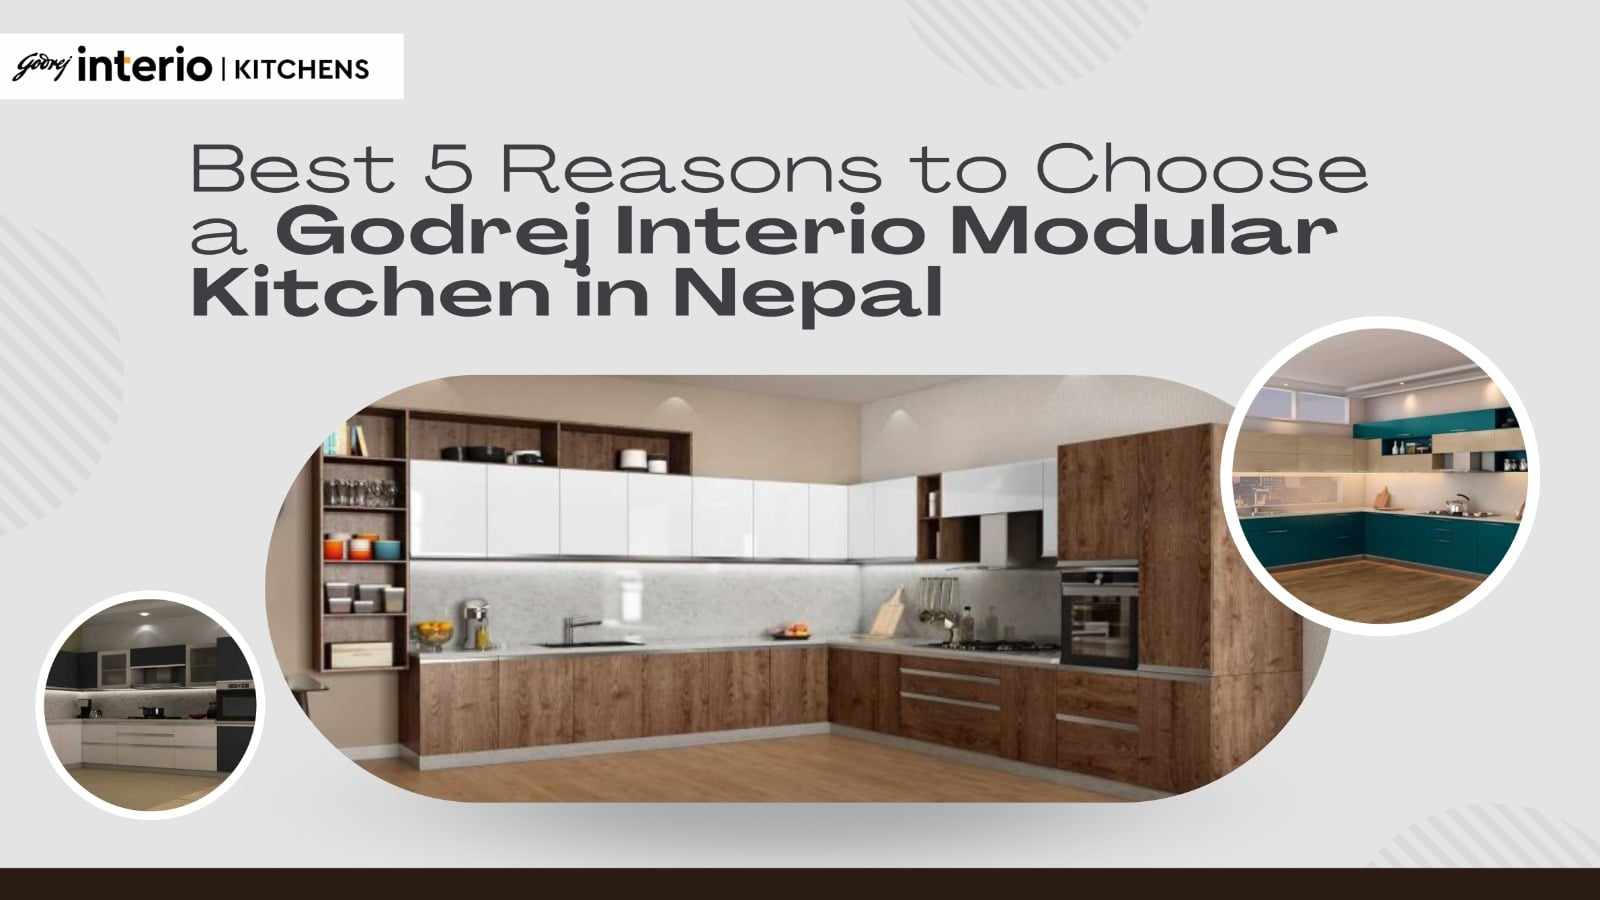 Best 5 Reasons to Choose a Godrej Interio Modular Kitchen in Nepal